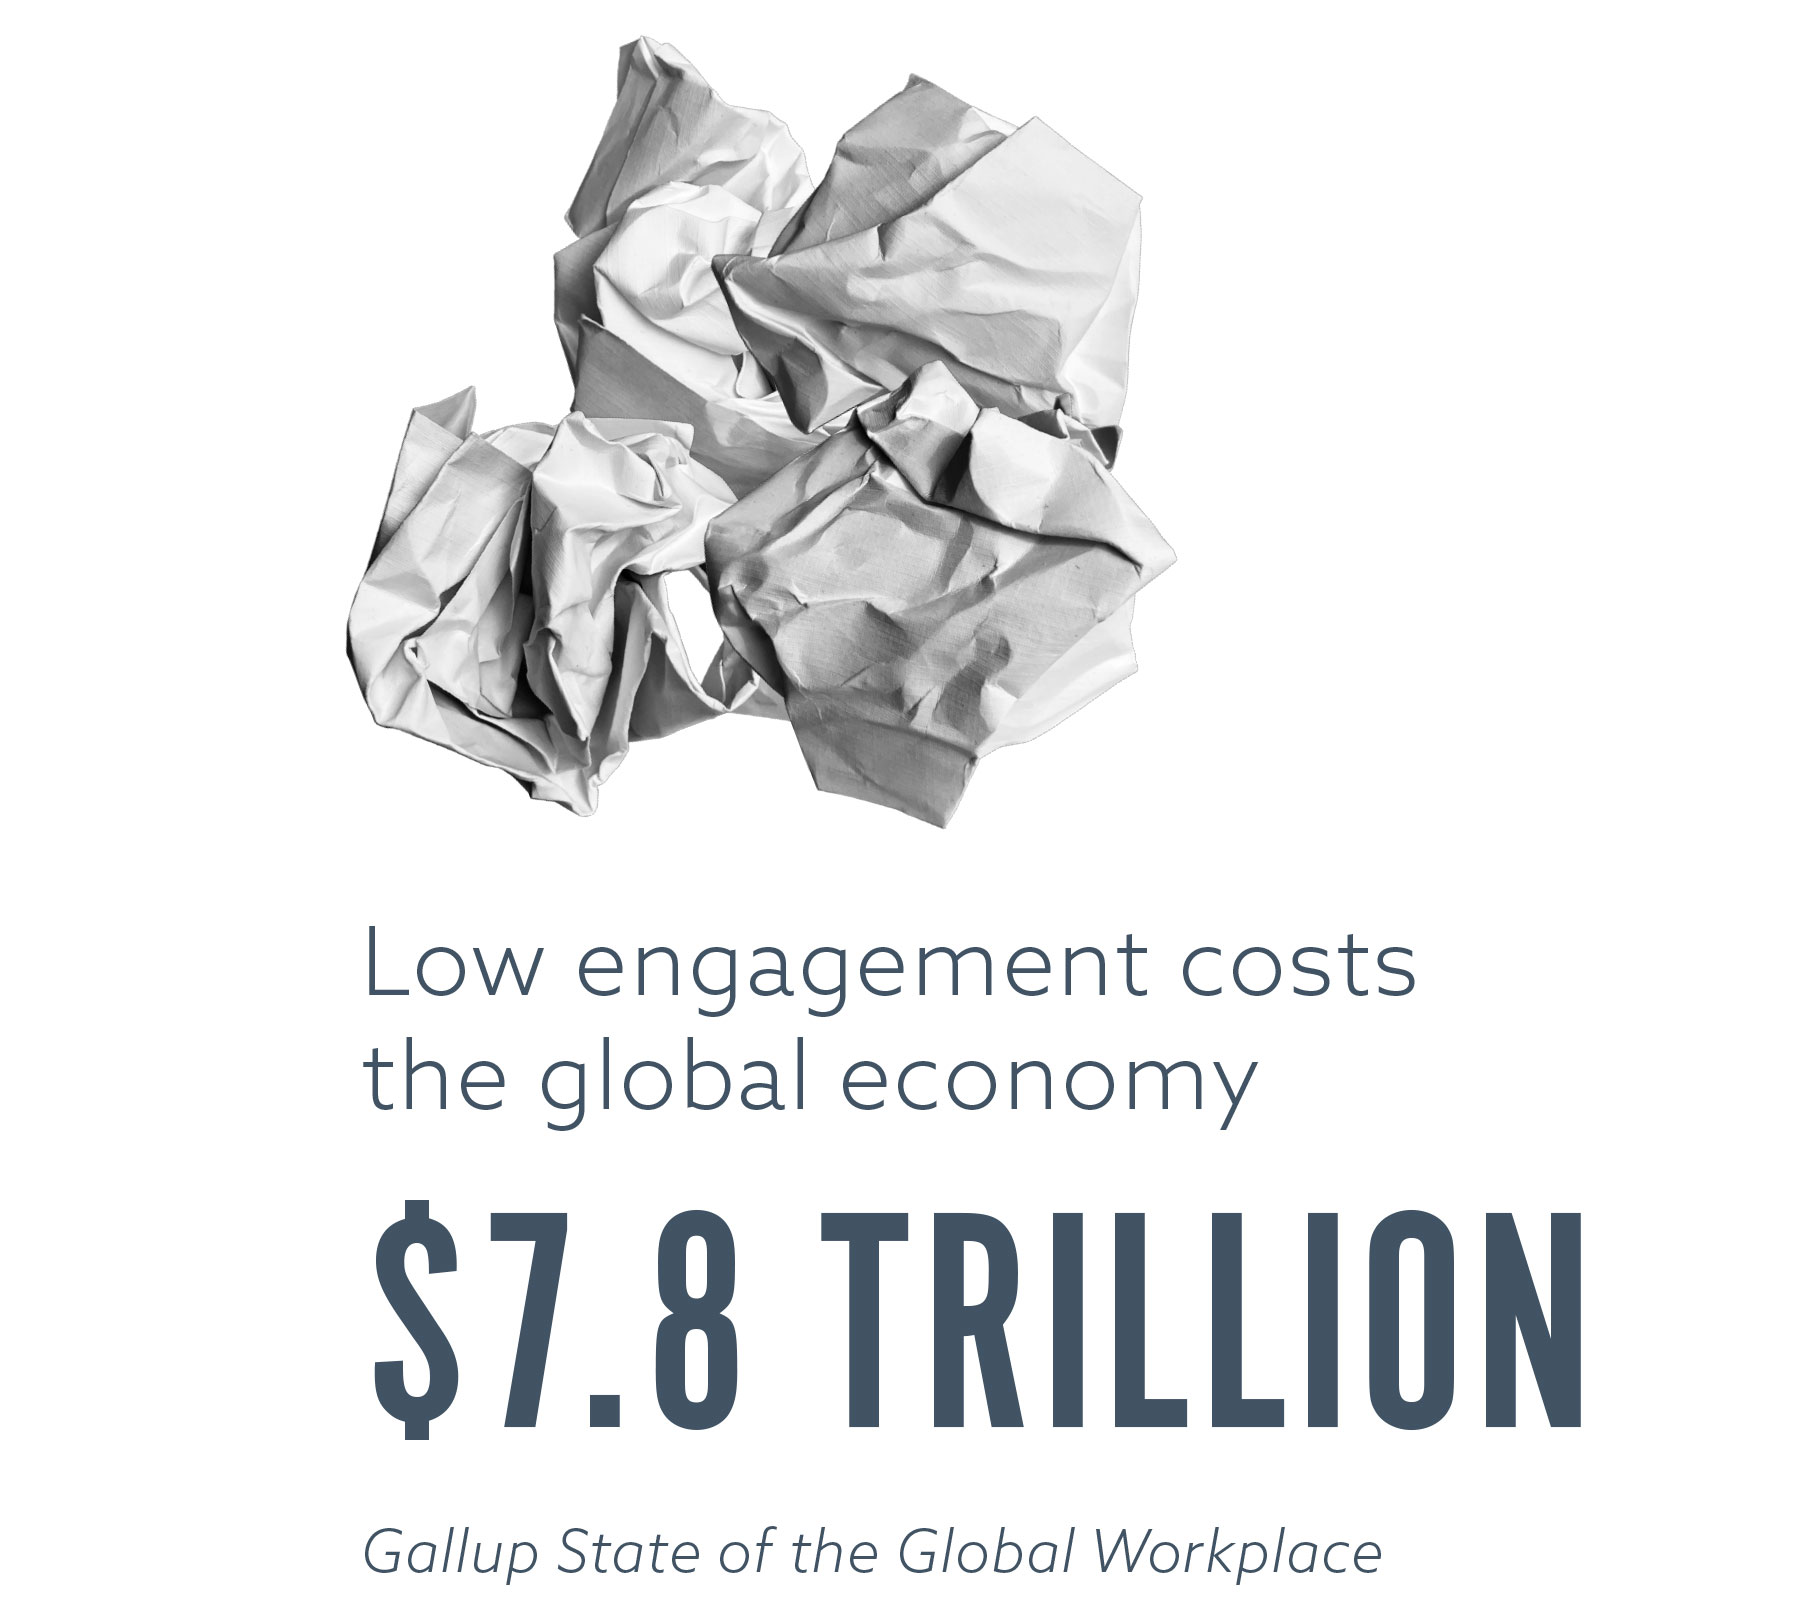 Low engagement costs the global economy $7.8 trillion. Gallup State of the Global Workplace